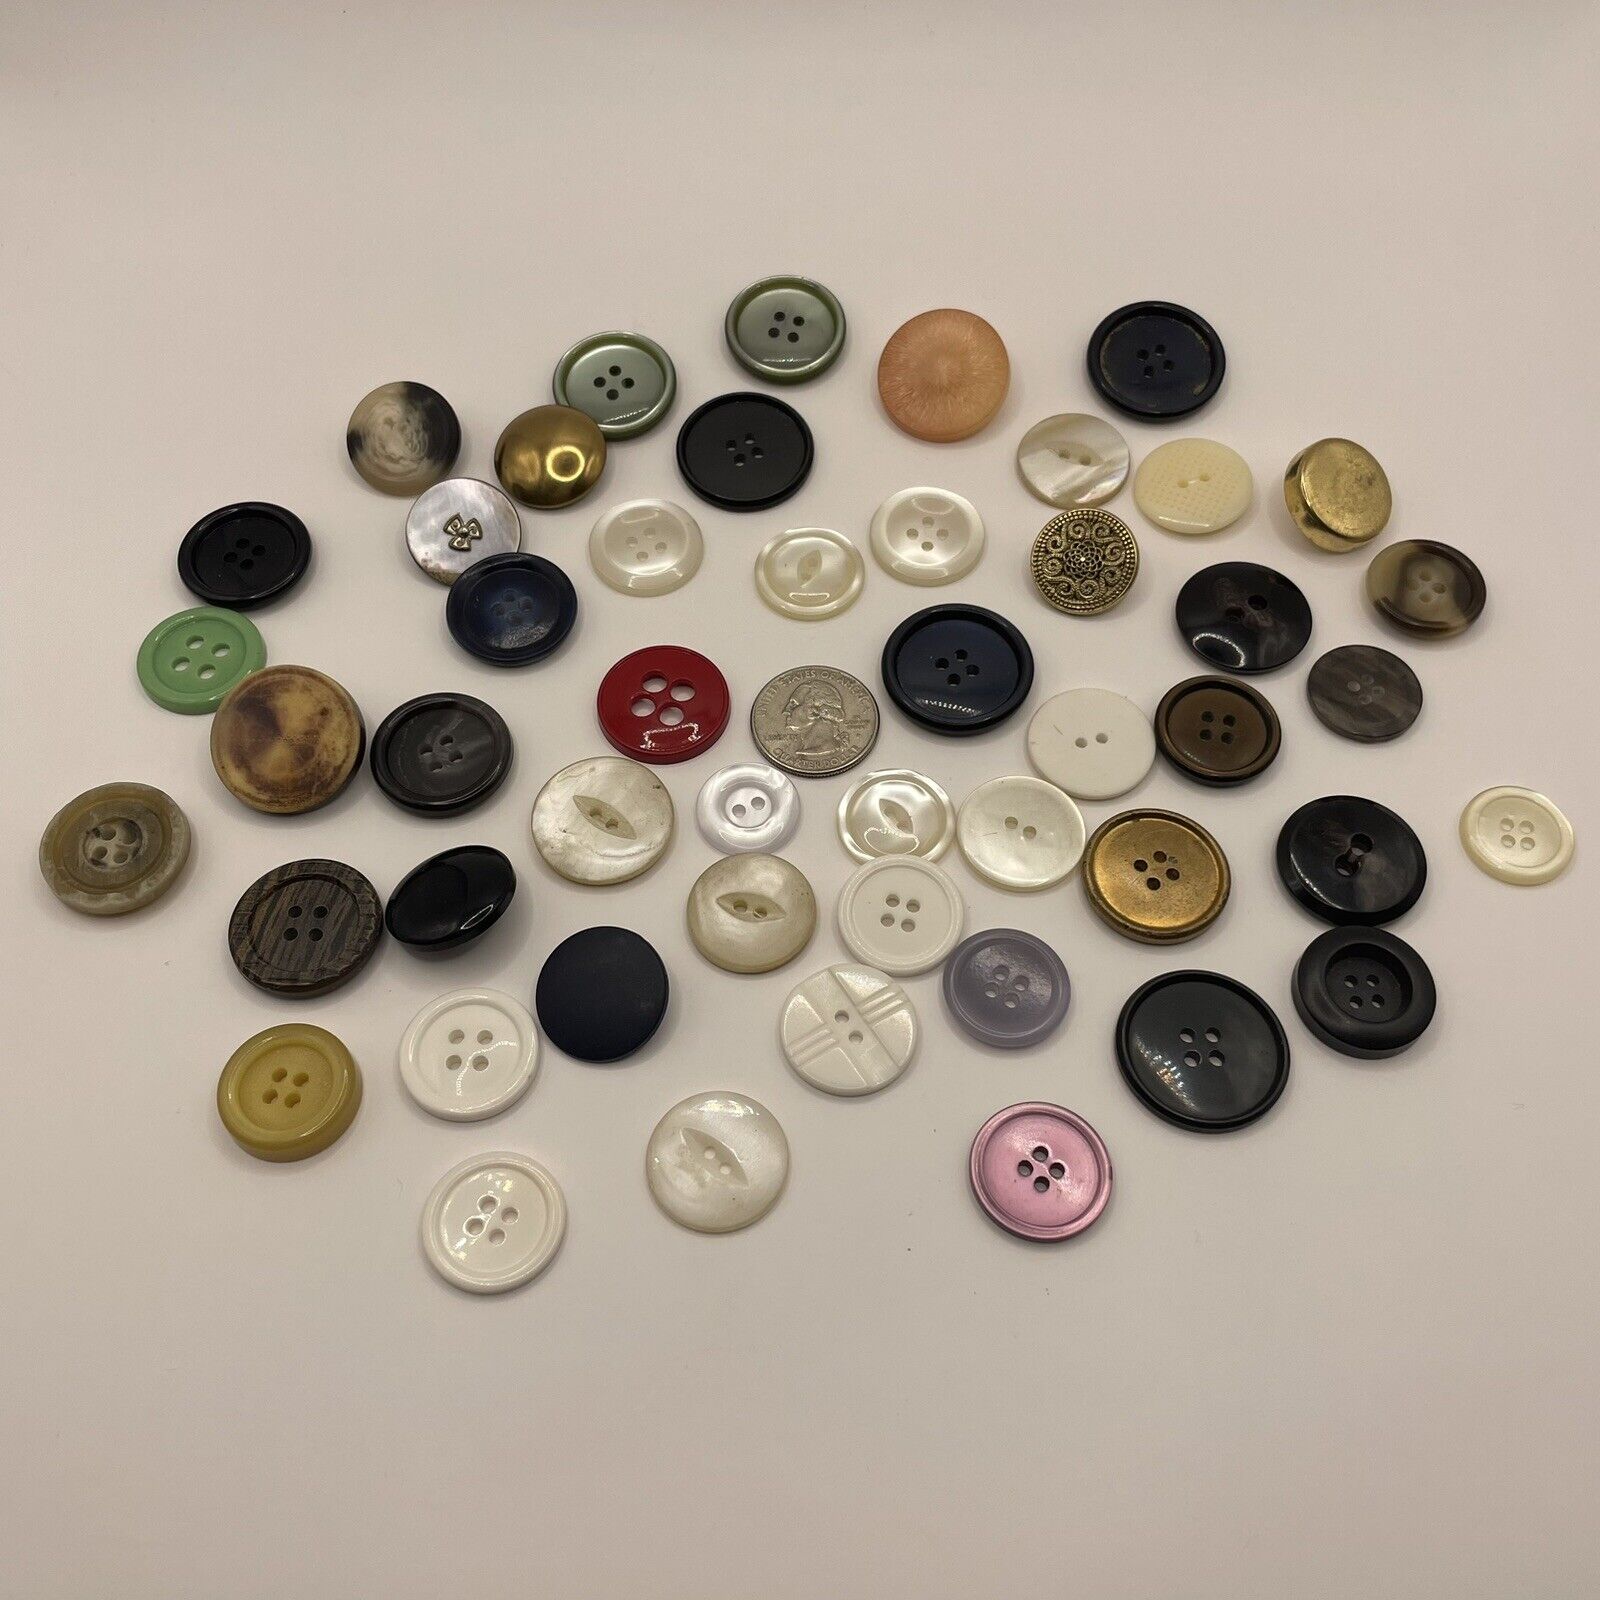 45 Vintage Plastic Sewing Buttons